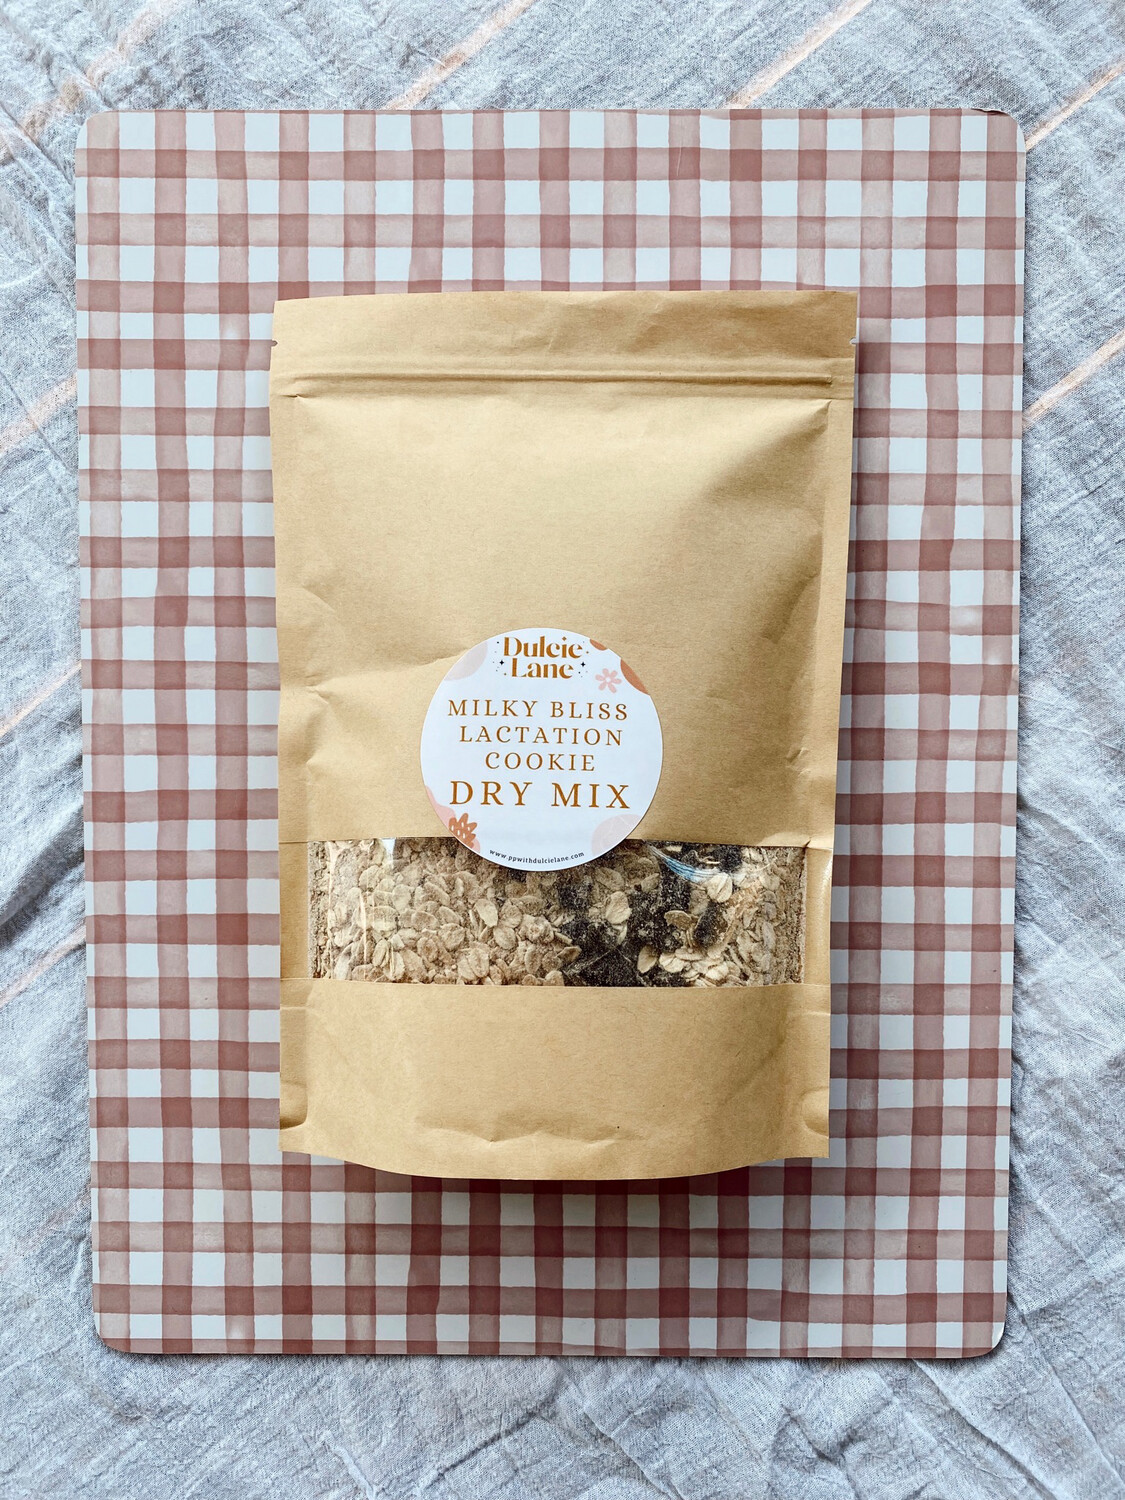 MILKY BLISS LACTATION COOKIE DRY MIX